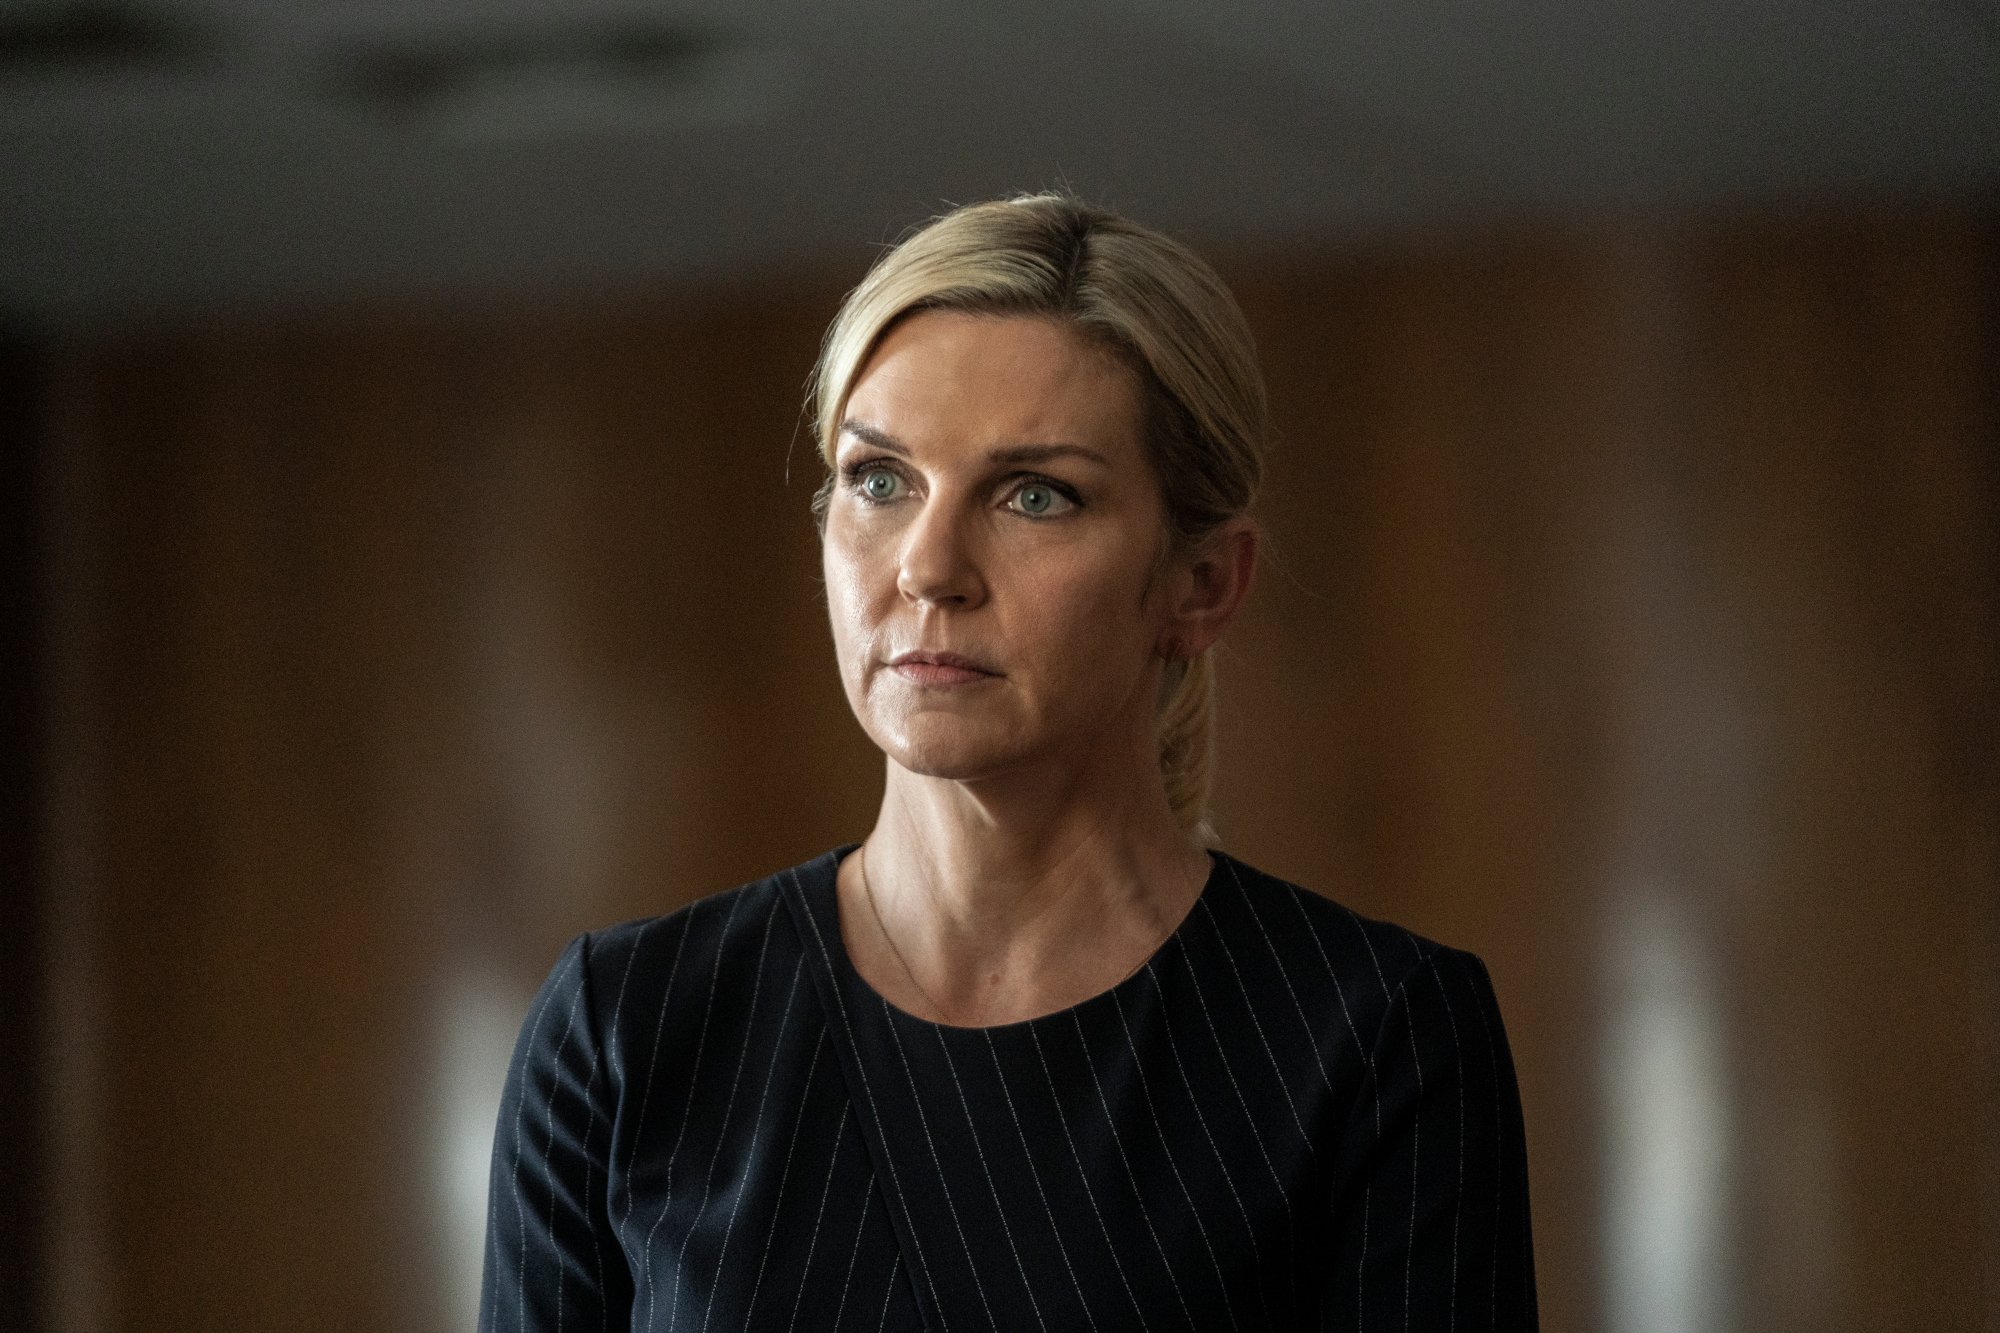 Rhea Seehorn as Kim Wexler in 'Better Call Saul' Season 6 Episode 6. She's in court, her hair is pulled back in a ponytail, and she's wearing a black shirt.